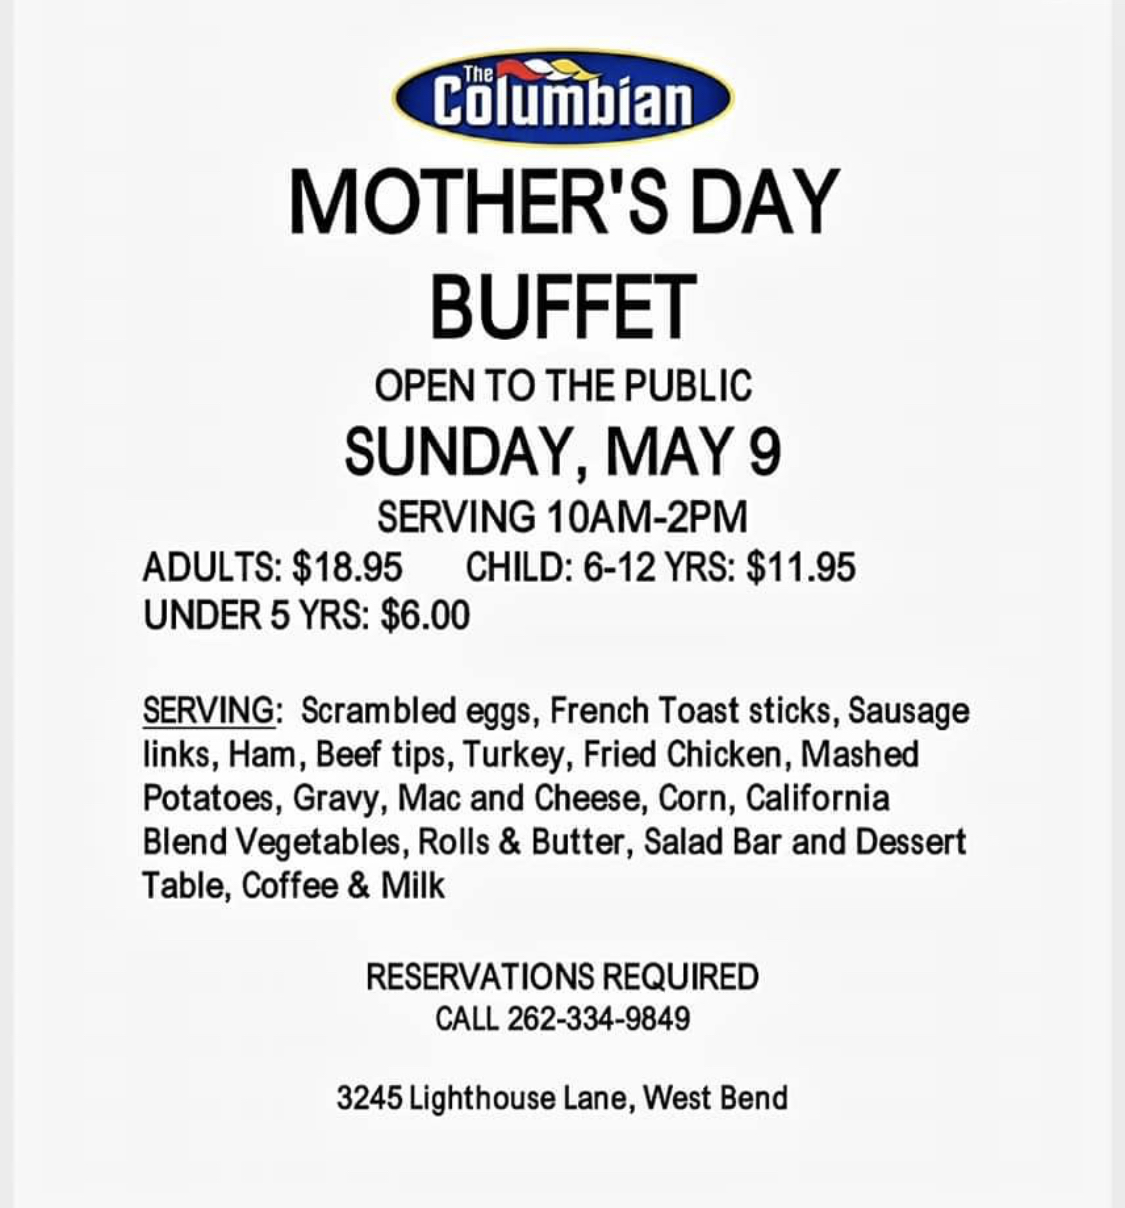 Make your Mother’s Day reservations at The Columbian Washington